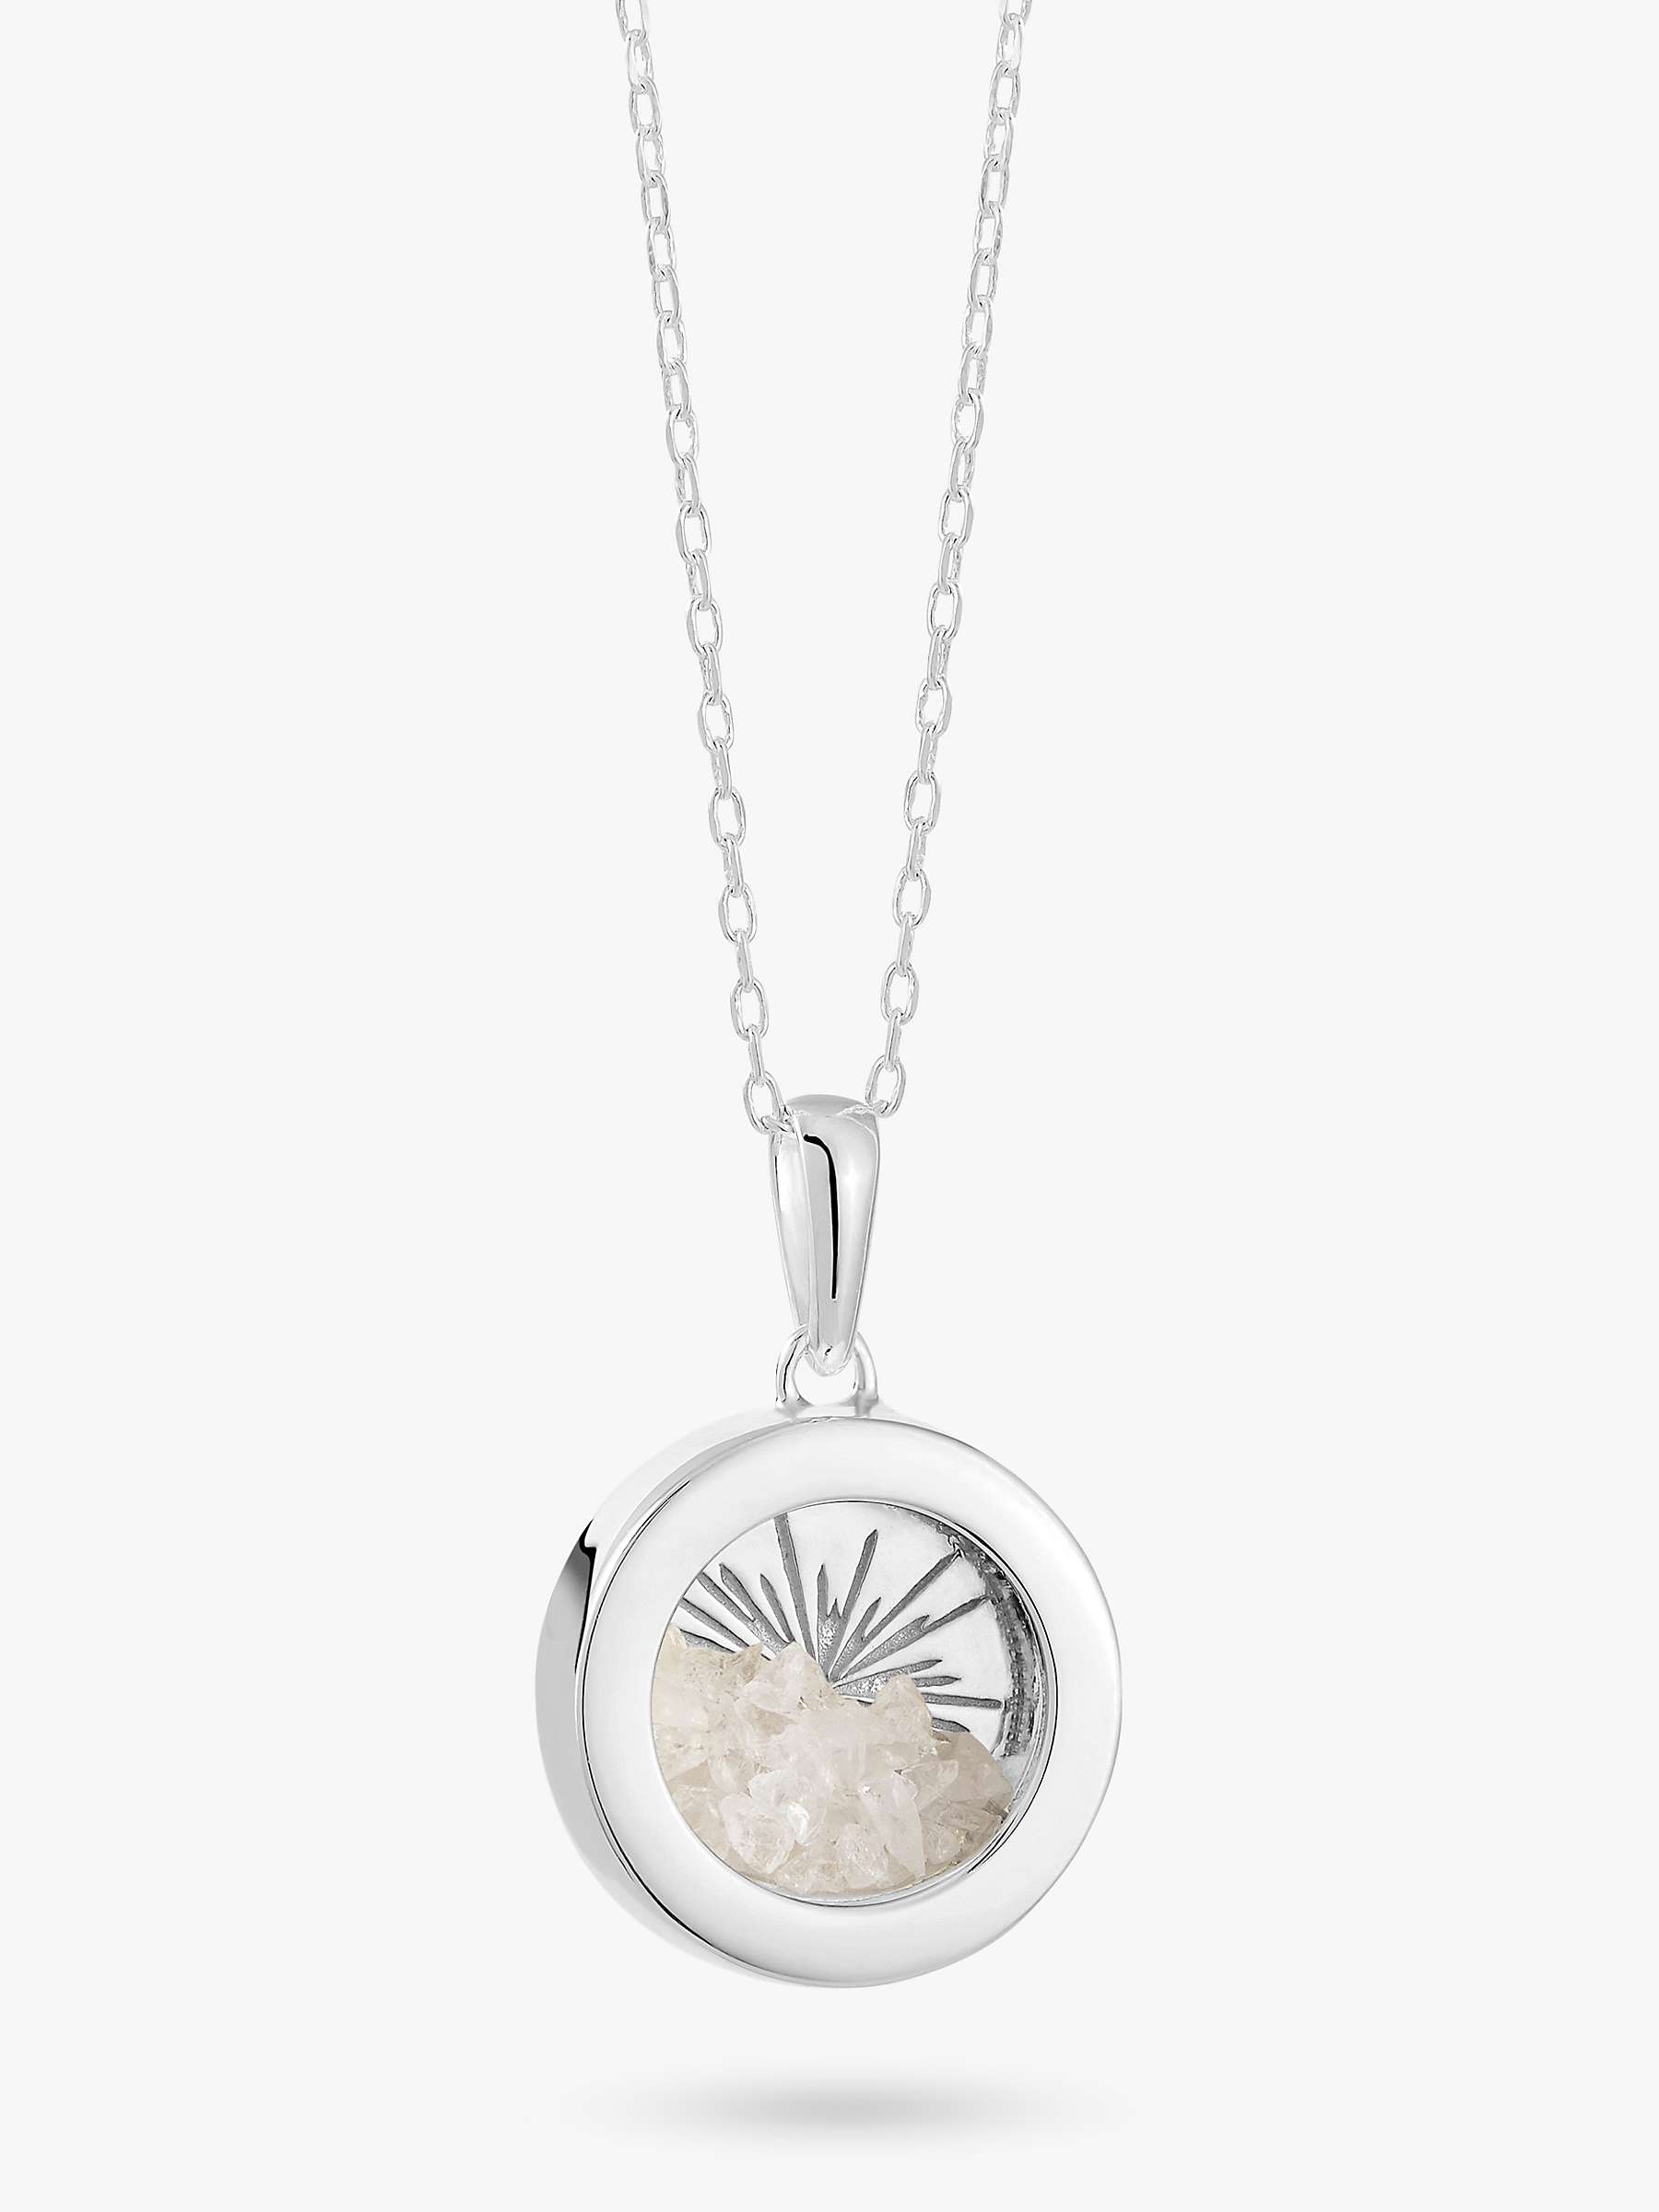 Buy Rachel Jackson London Personalised Small Deco Sun Birthstone Amulet Necklace, Silver Online at johnlewis.com